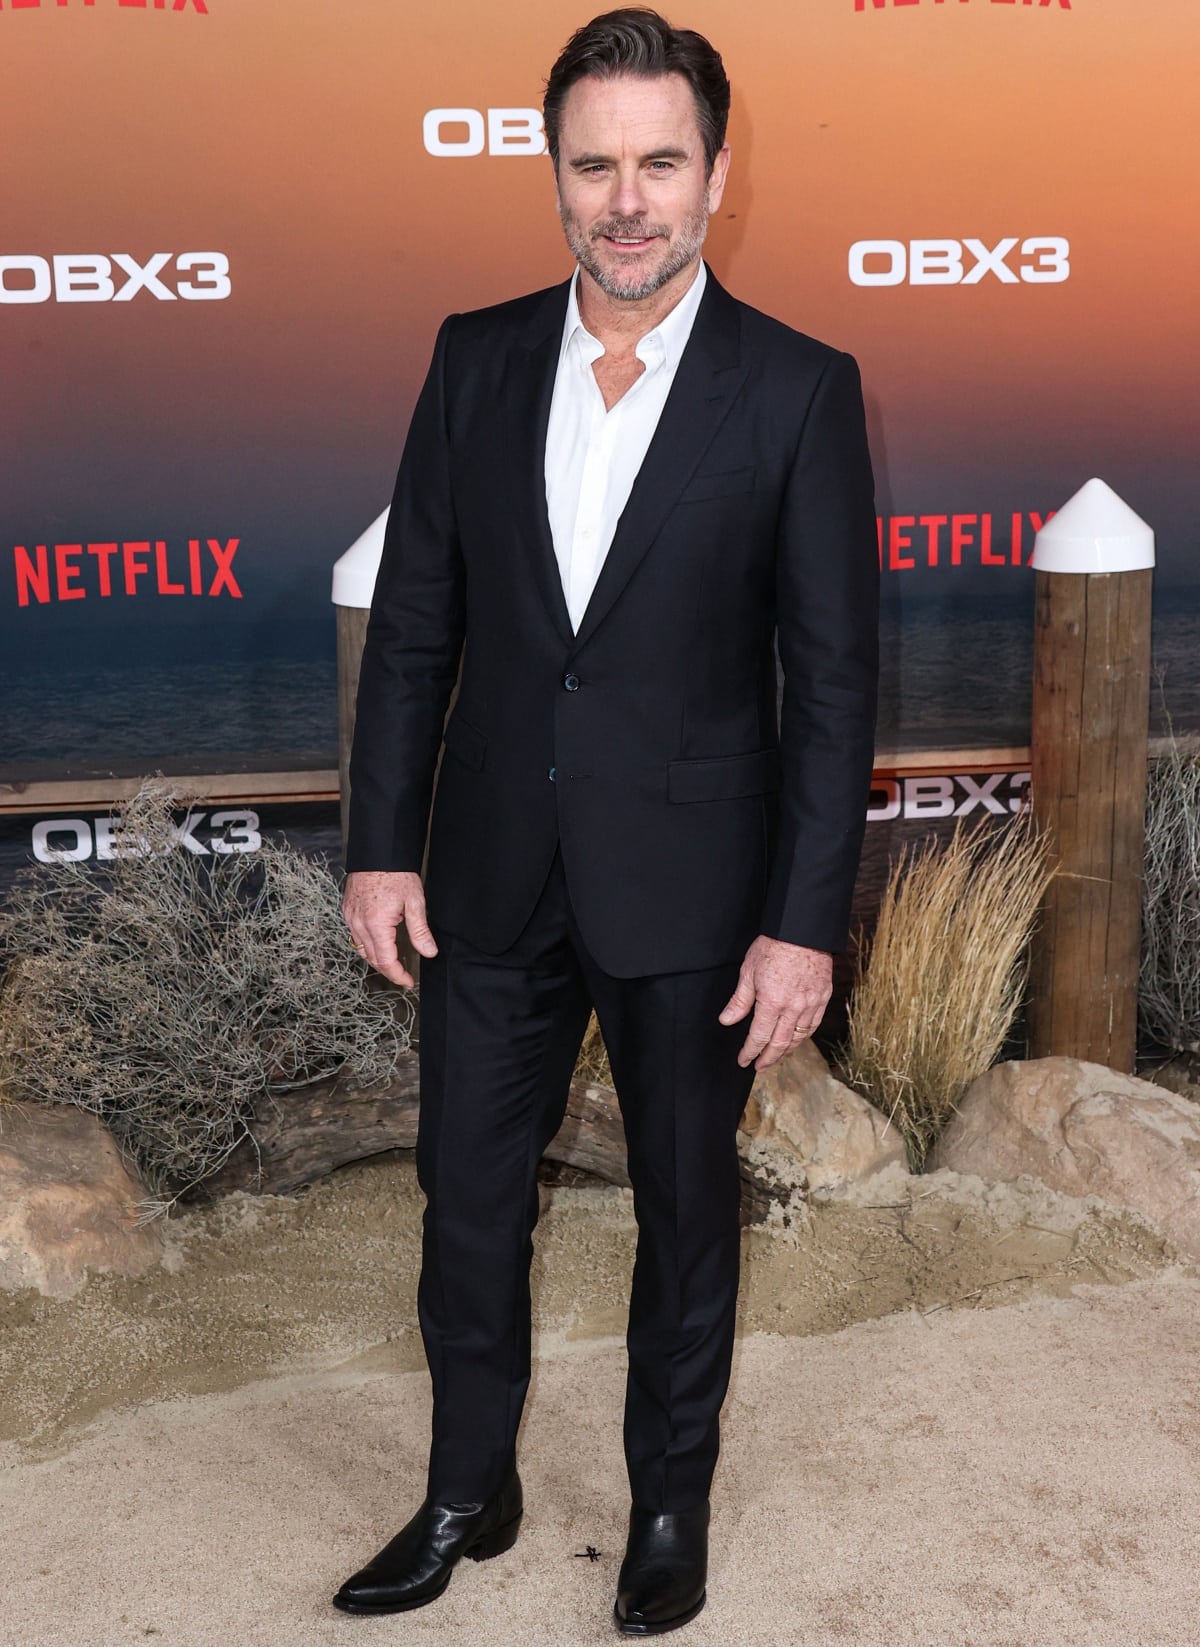 Charles Esten dressed up in a monochromatic suit and pointy-toe boots at the premiere of Netflix’s Outer Banks Season 3